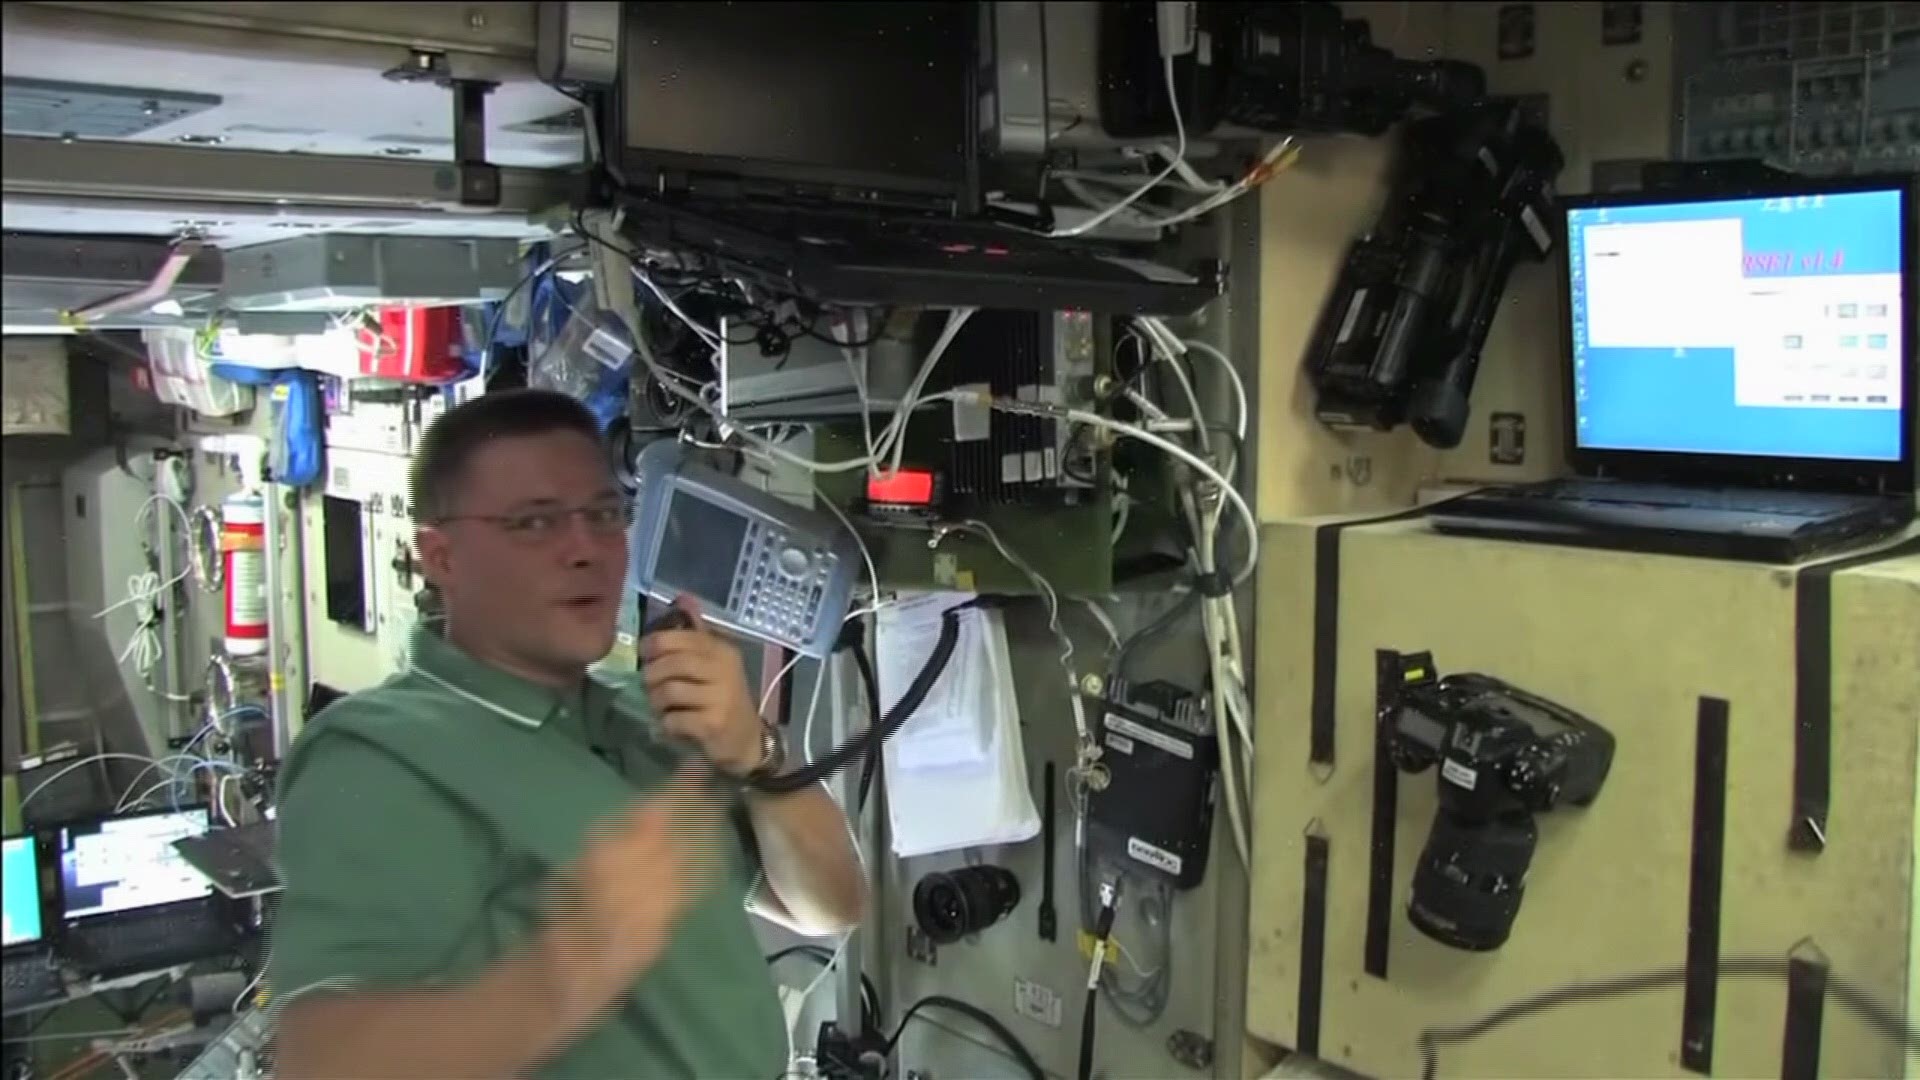 San Diego man builds radio in garage for students to be able to talk to astronauts